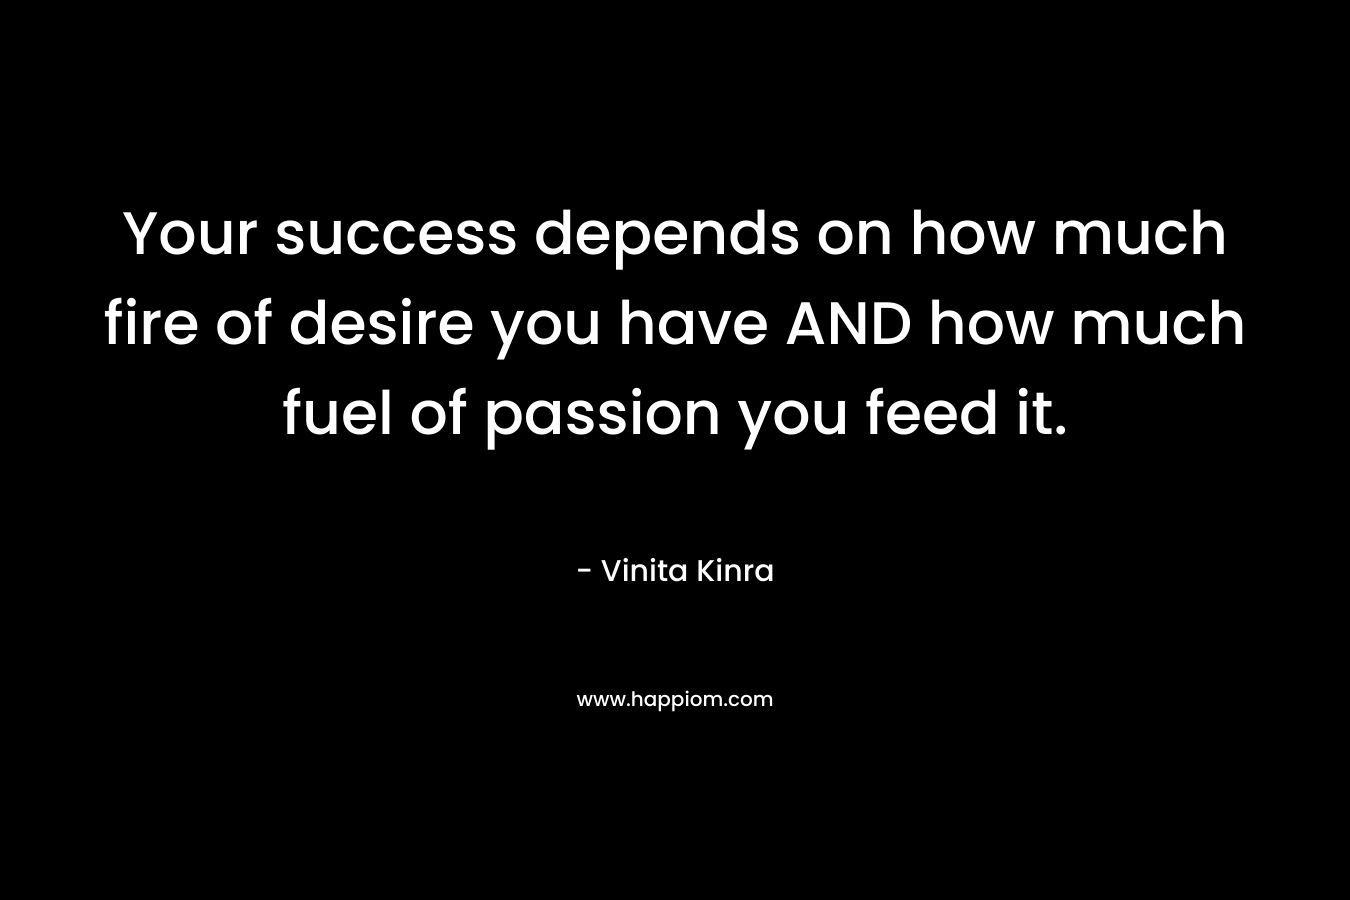 Your success depends on how much fire of desire you have AND how much fuel of passion you feed it.